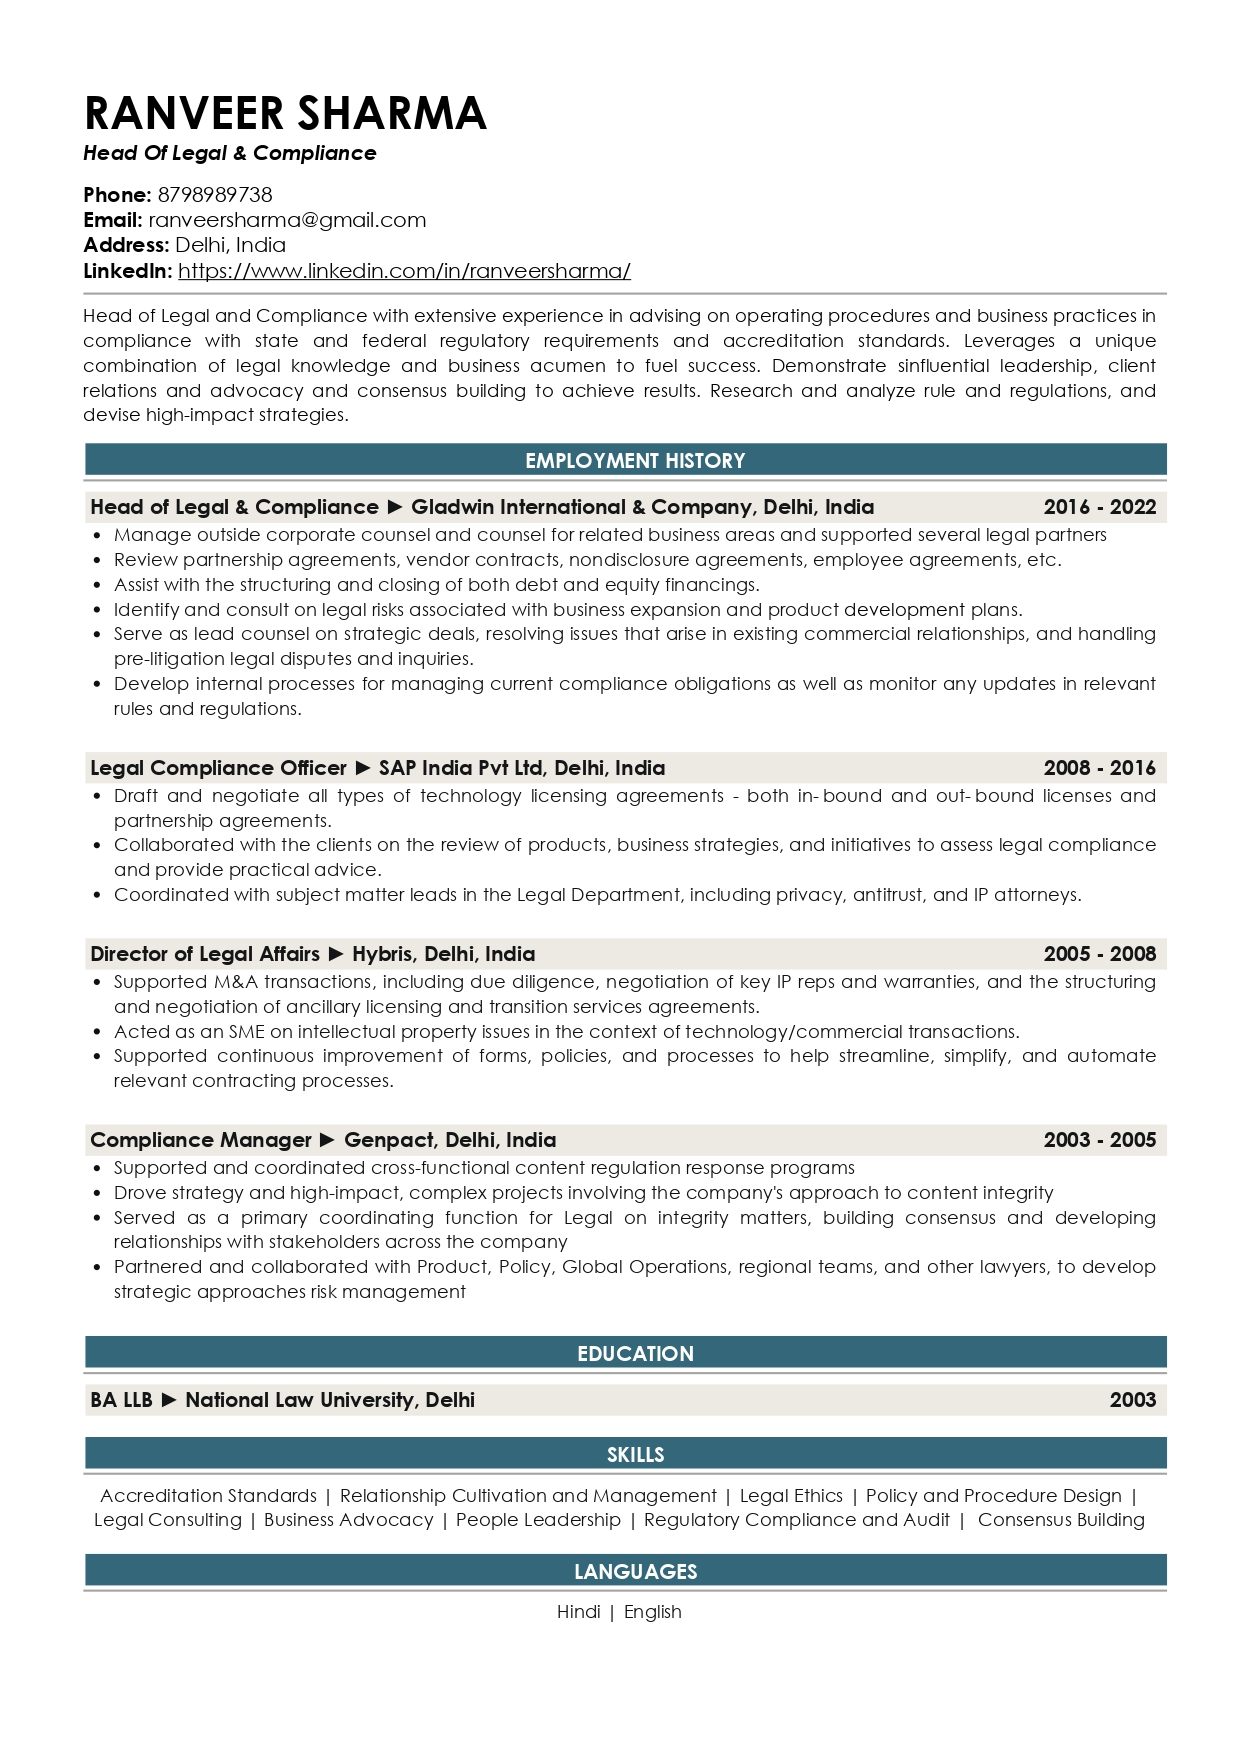 Resume of Head of Legal & Compliance 